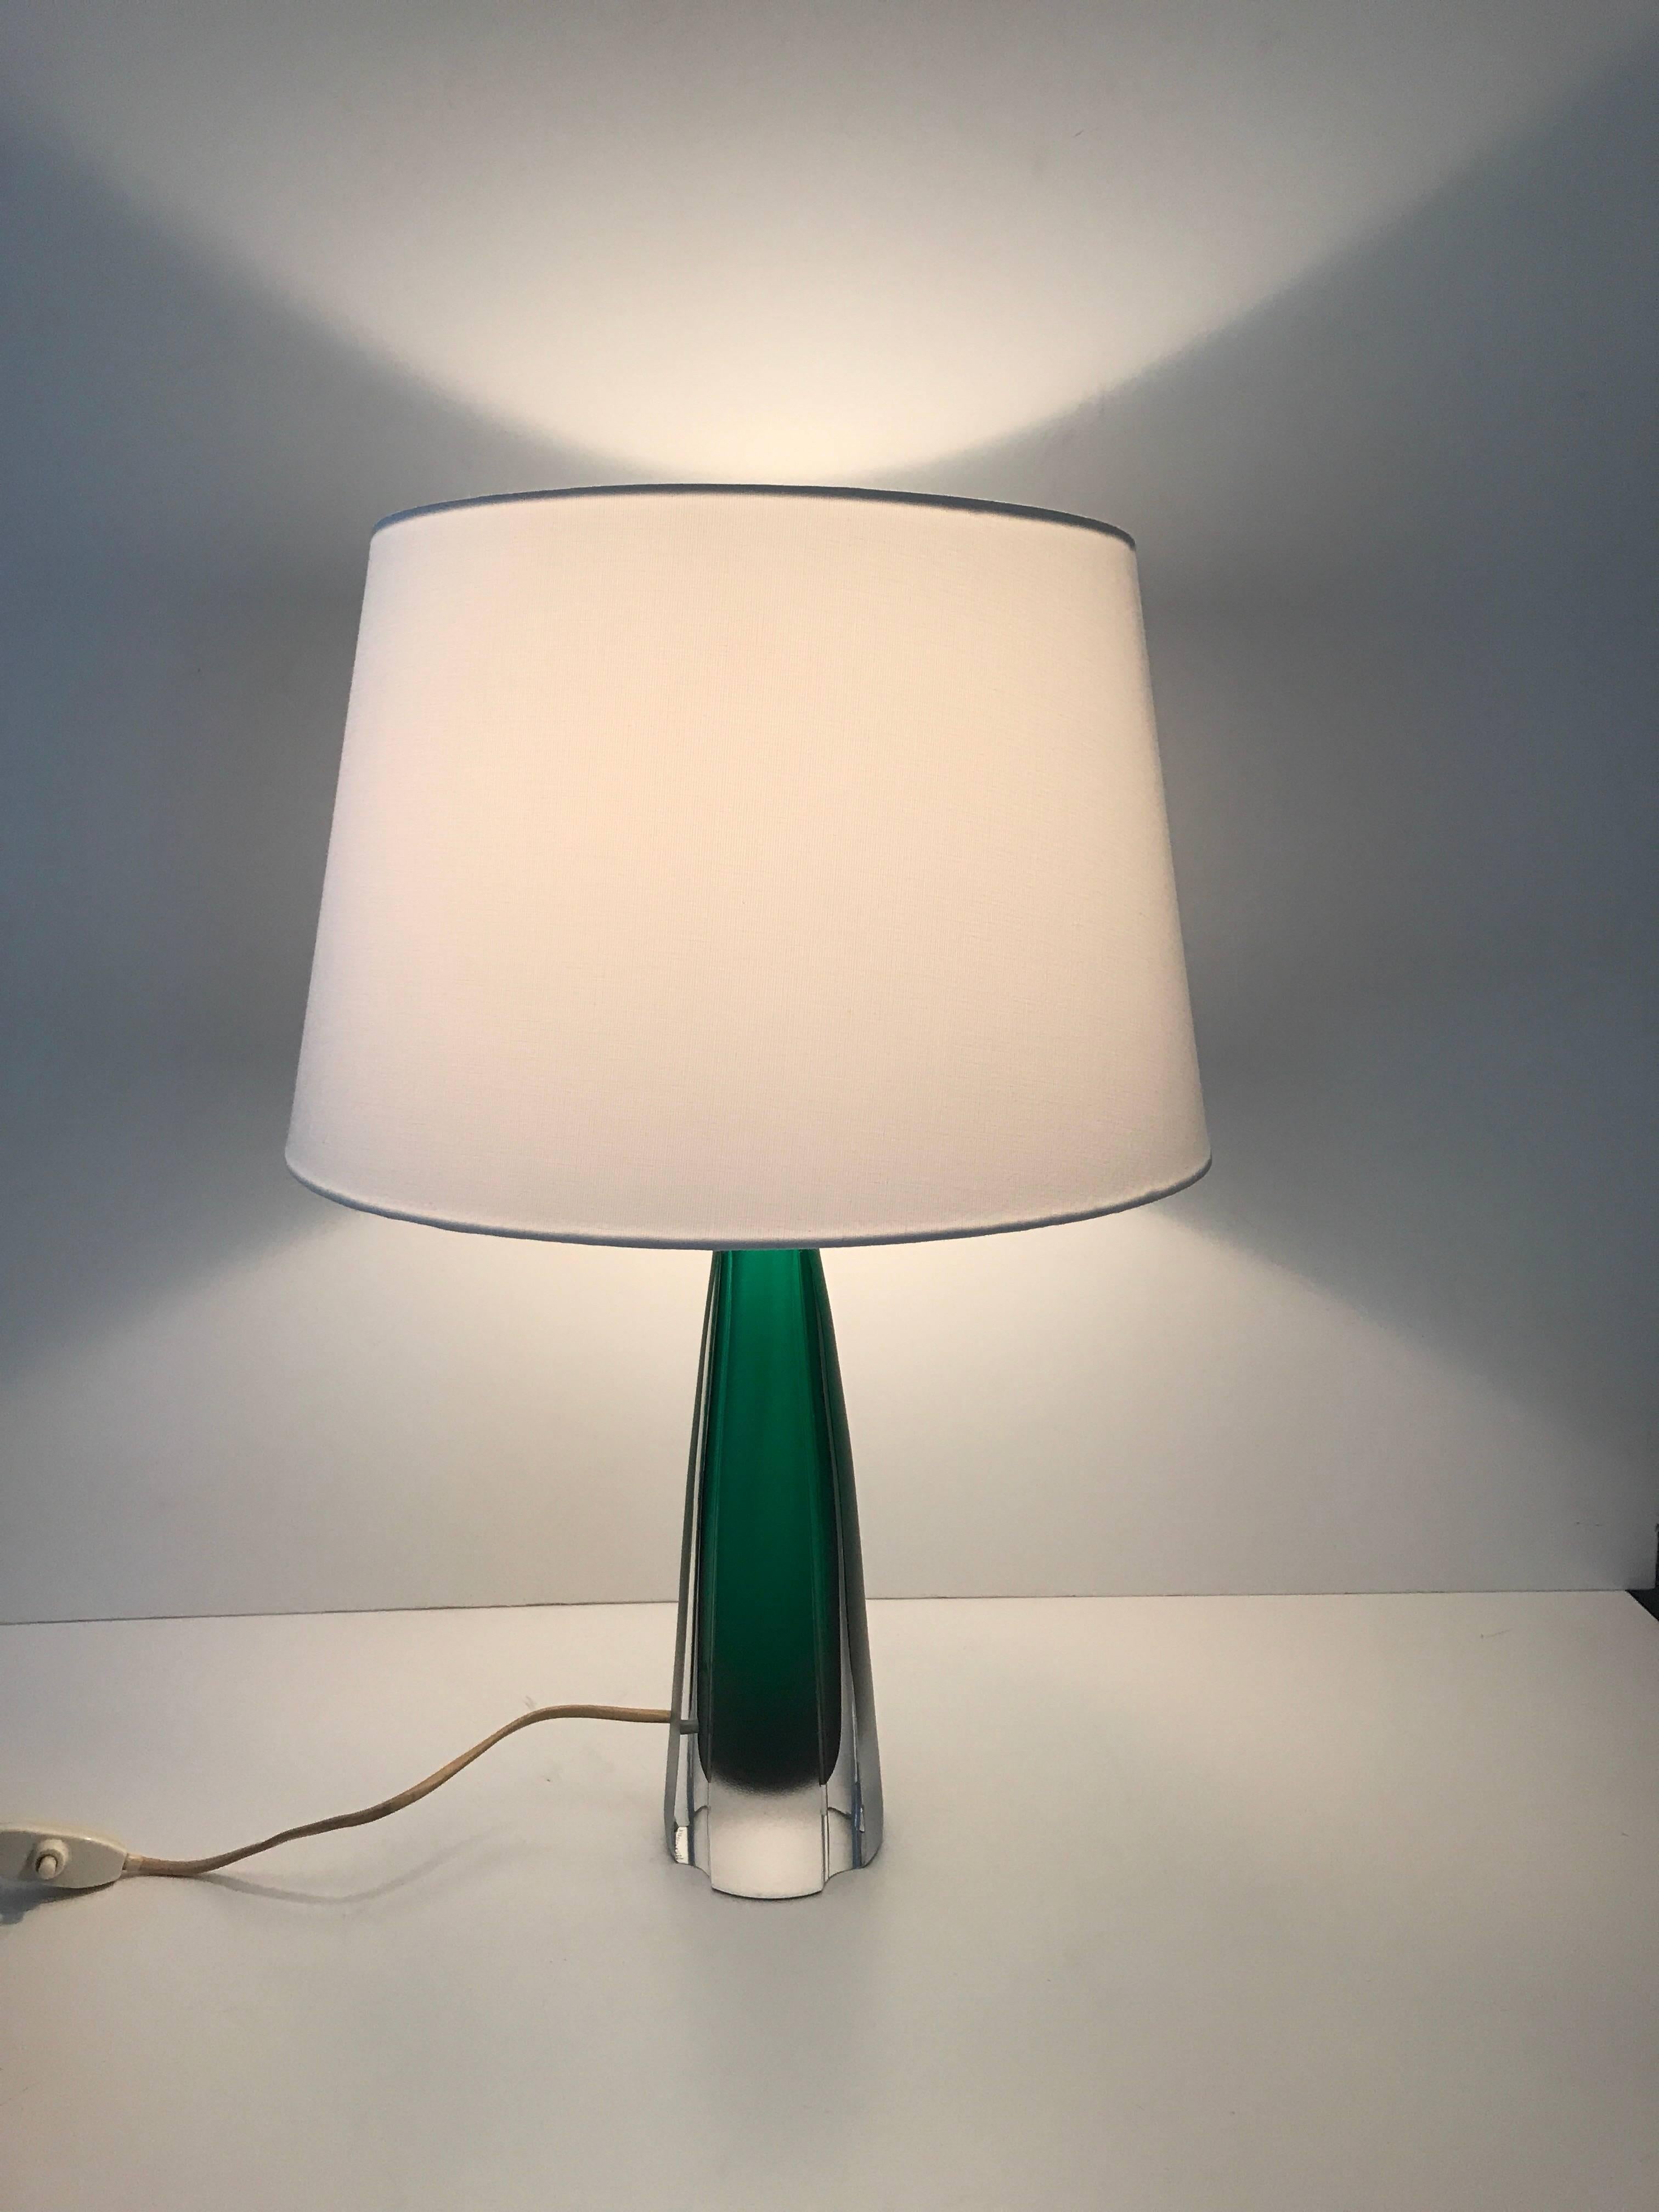 Swedish 1959, Kosta art glass table lamp. A beautiful Kosta art glass table lamp in a green underlay glass. The lamp has a beautiful intense green core that shows through the frosted, and partly cut-glass. It is marked Kosta Hx BA59, which tells us